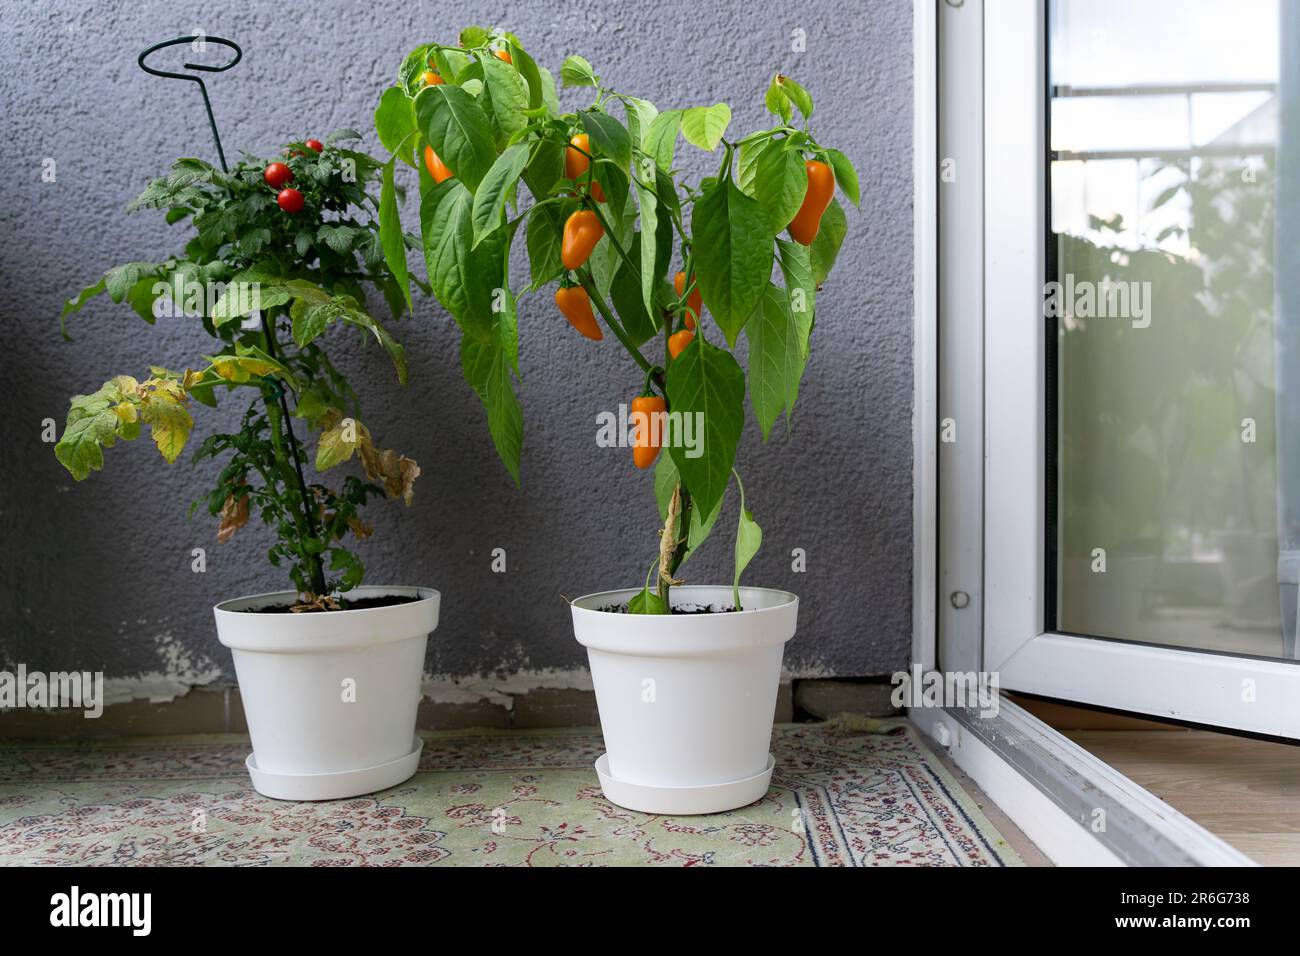 Bushes of plants grown on the balcony. Cherry tomatoes Tiny Tim Tomato and hot chili peppers NuMex Pumpkin Spice Chili in white pots with ripe fruits. Stock Photo